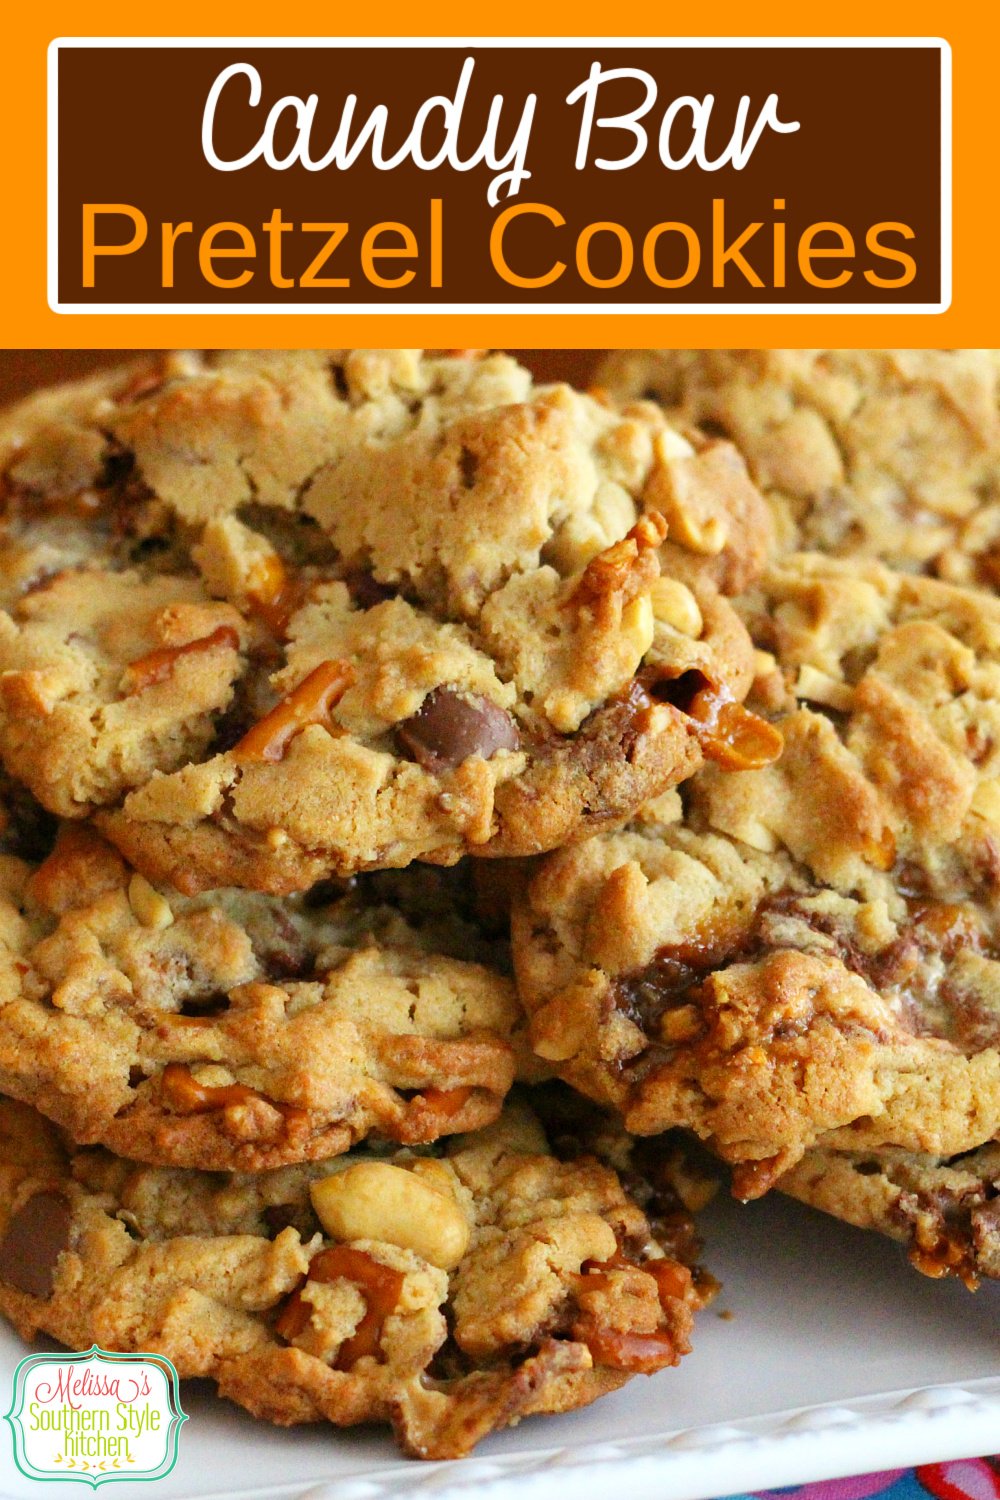 These sweet and salty Candy Bar Pretzel Cookies won't last long in your cookie jar! #candybarcookies #candybarpretzelcookies #cookies #cookierecipes #christmascookies #pretzels #holidaybaking #cookiejar #candybars #desserts #dessertfoodrecipes #southernrecipes #southernfood #fallbaking via @melissasssk